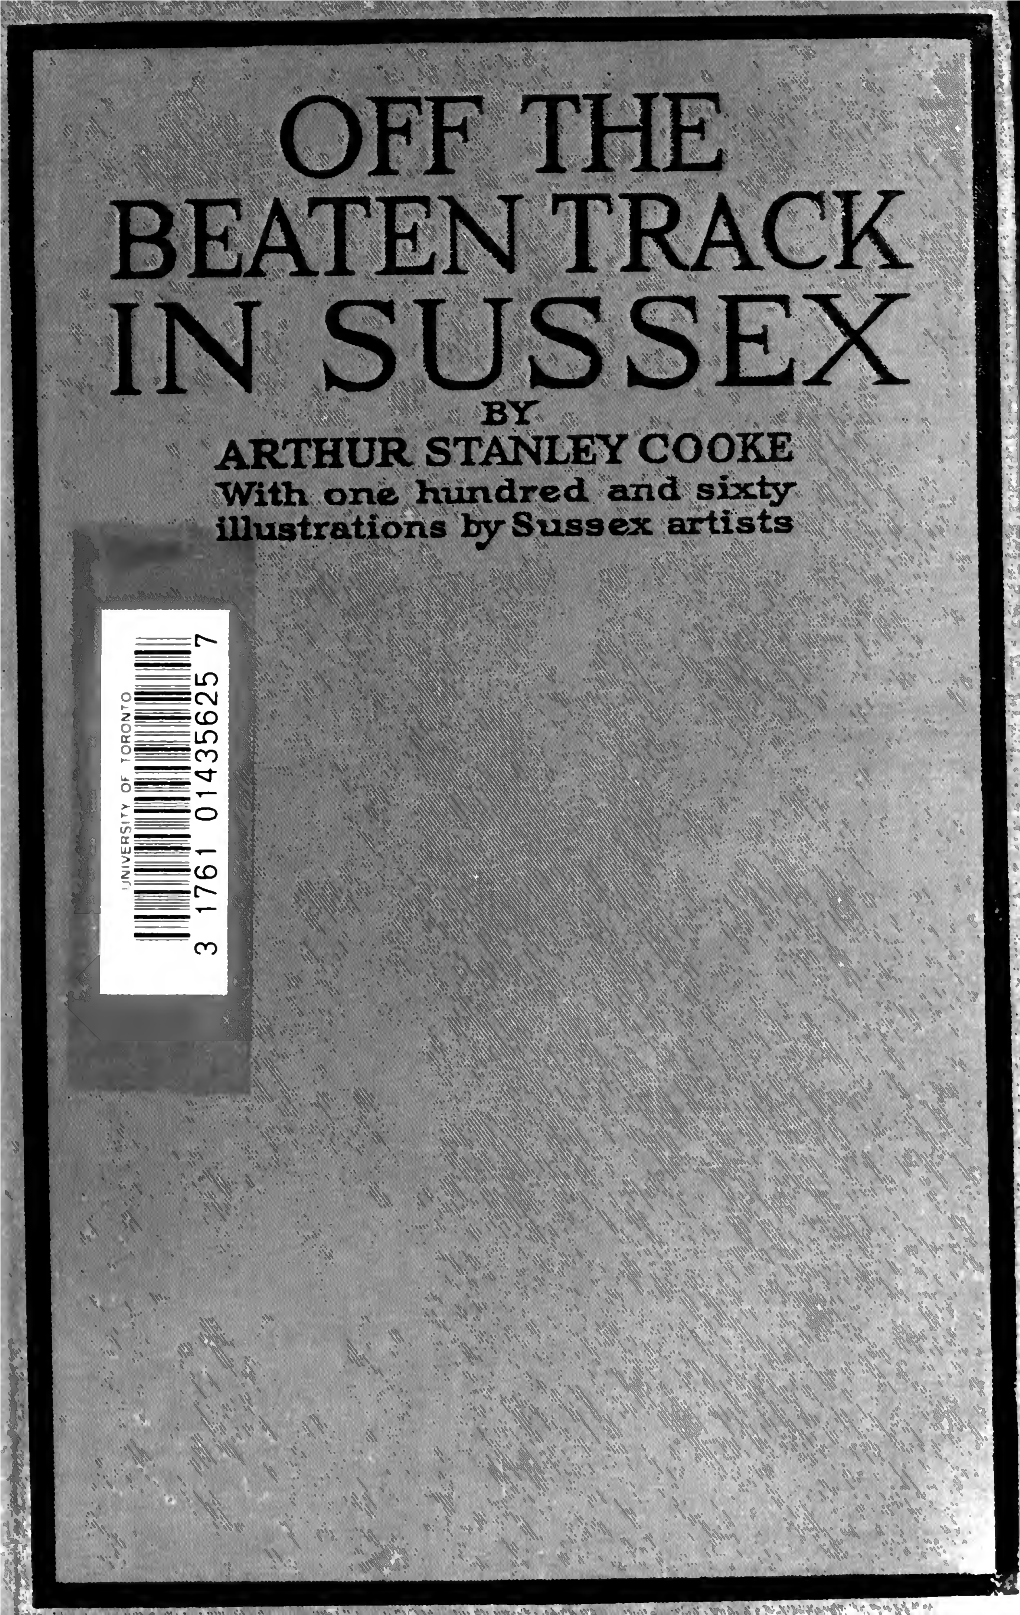 IN SUSSEX ARTHUR STANLEY COOKE Witti One Hundred and Sixty Illustrations by Sussex Artists